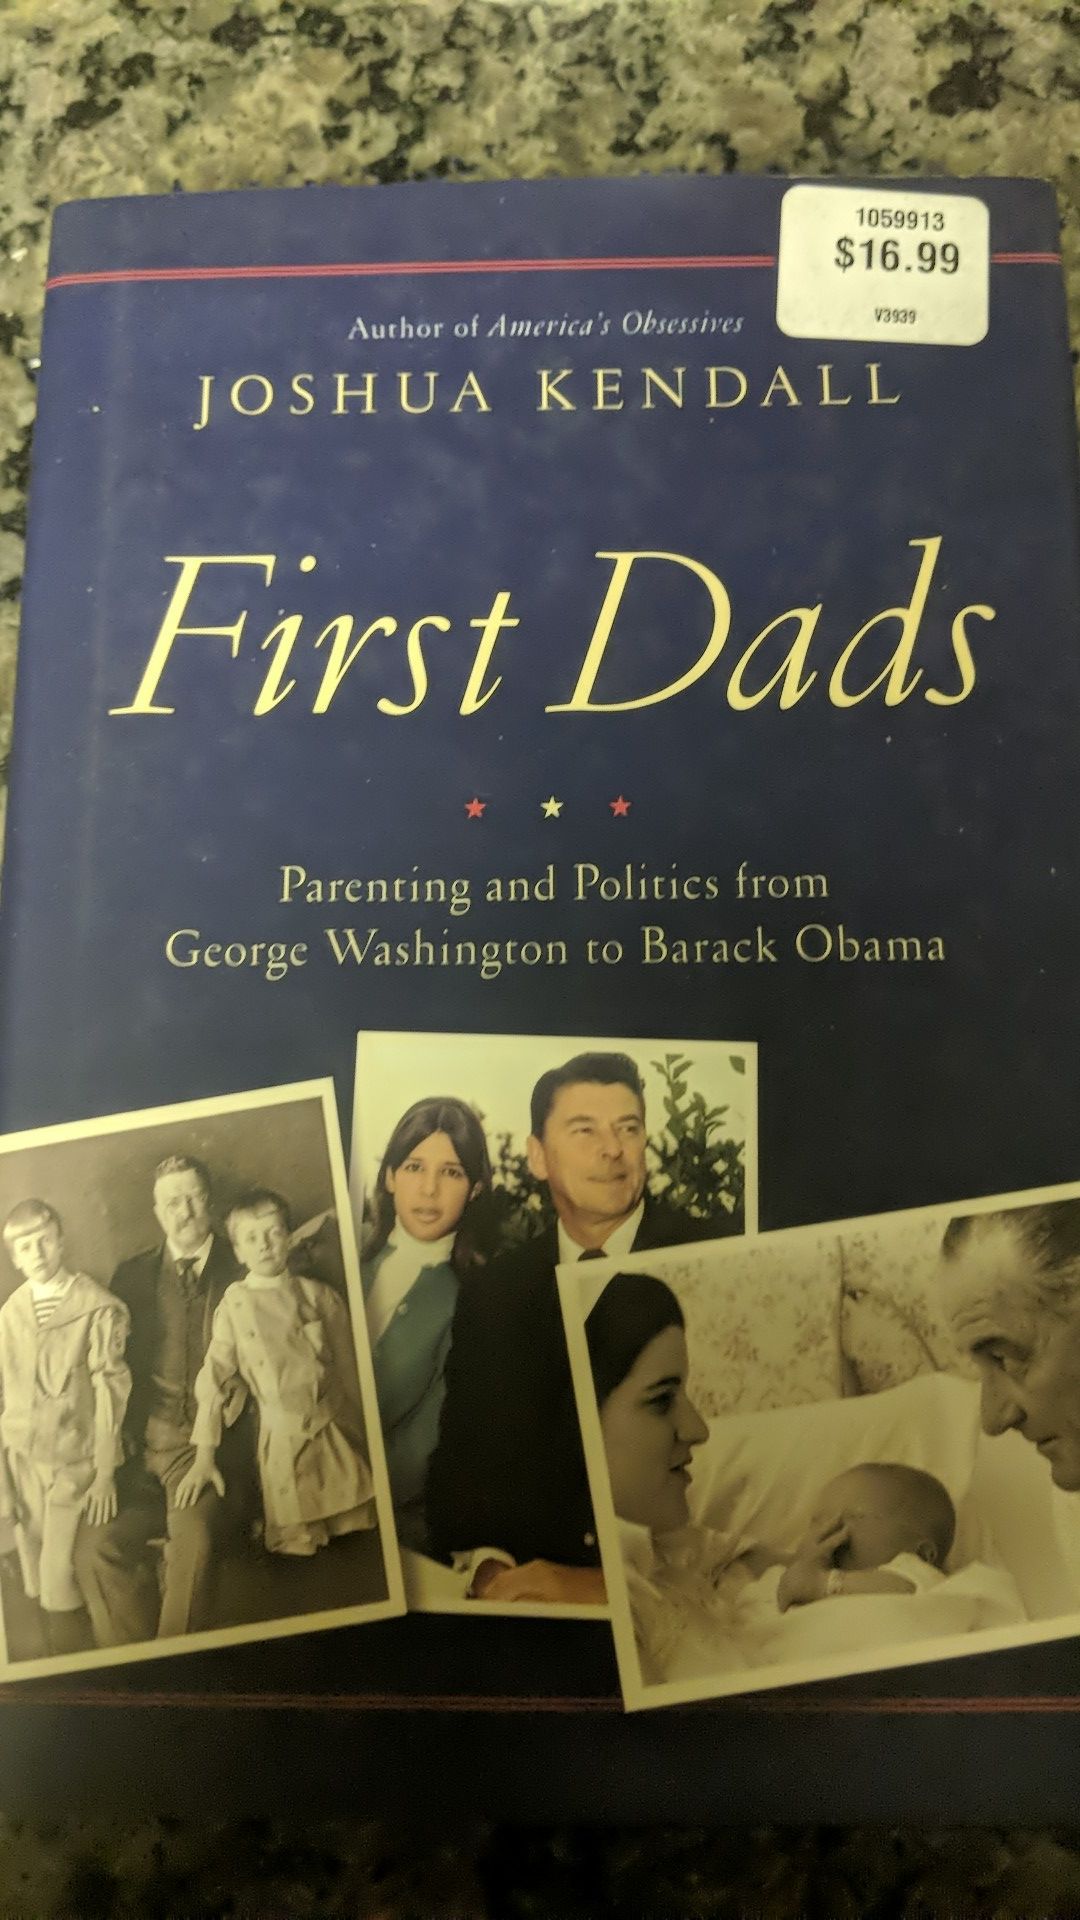 First Dad's - Parenting and Politics from George Washington to Barack Obama Book